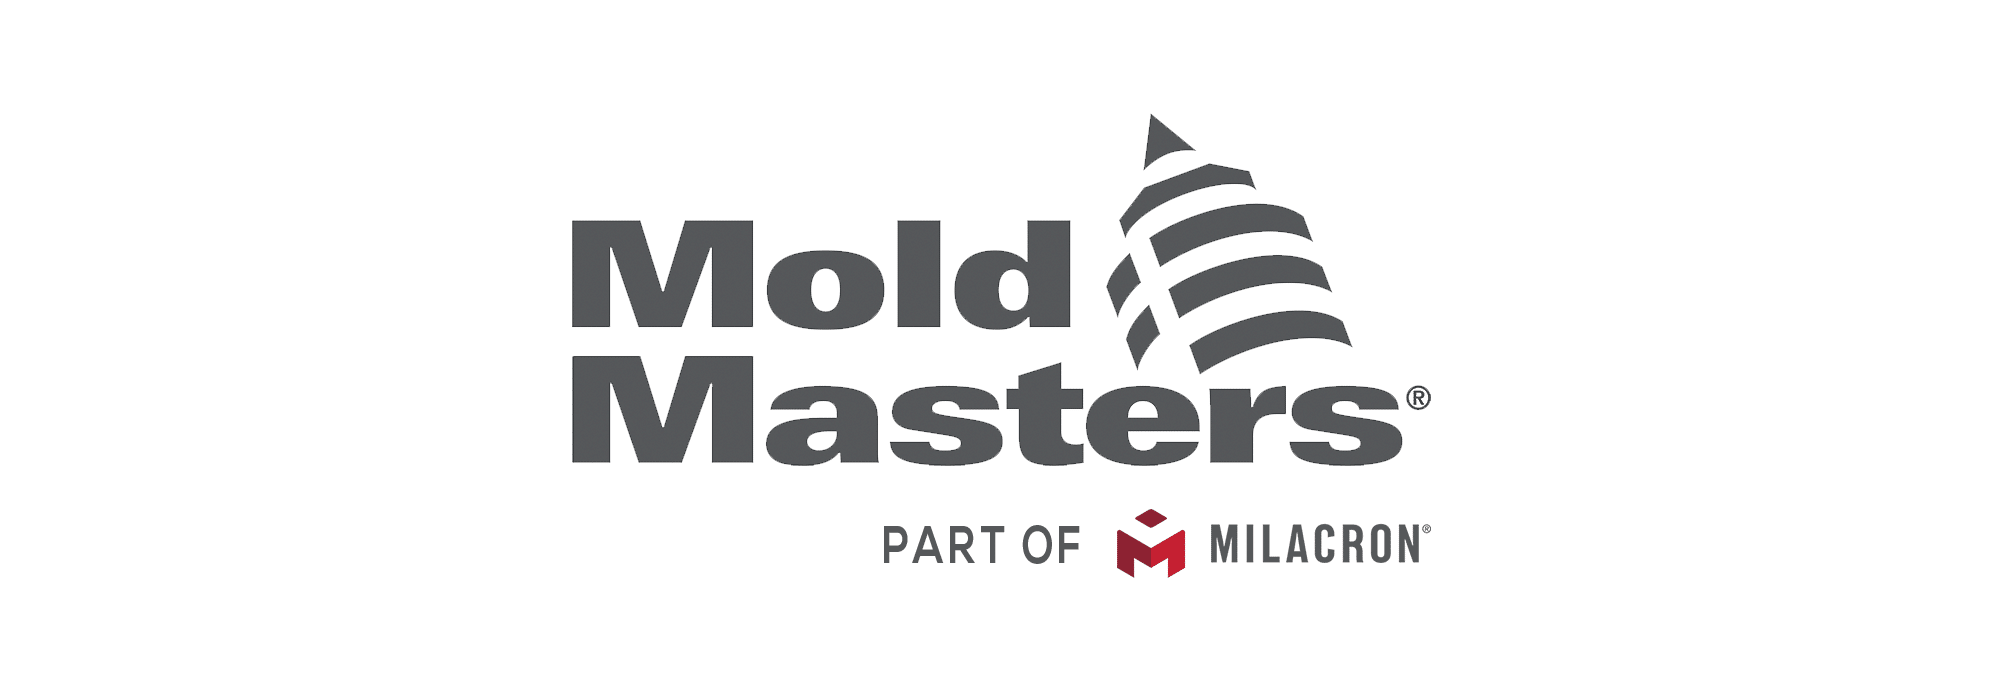 Mold Masters